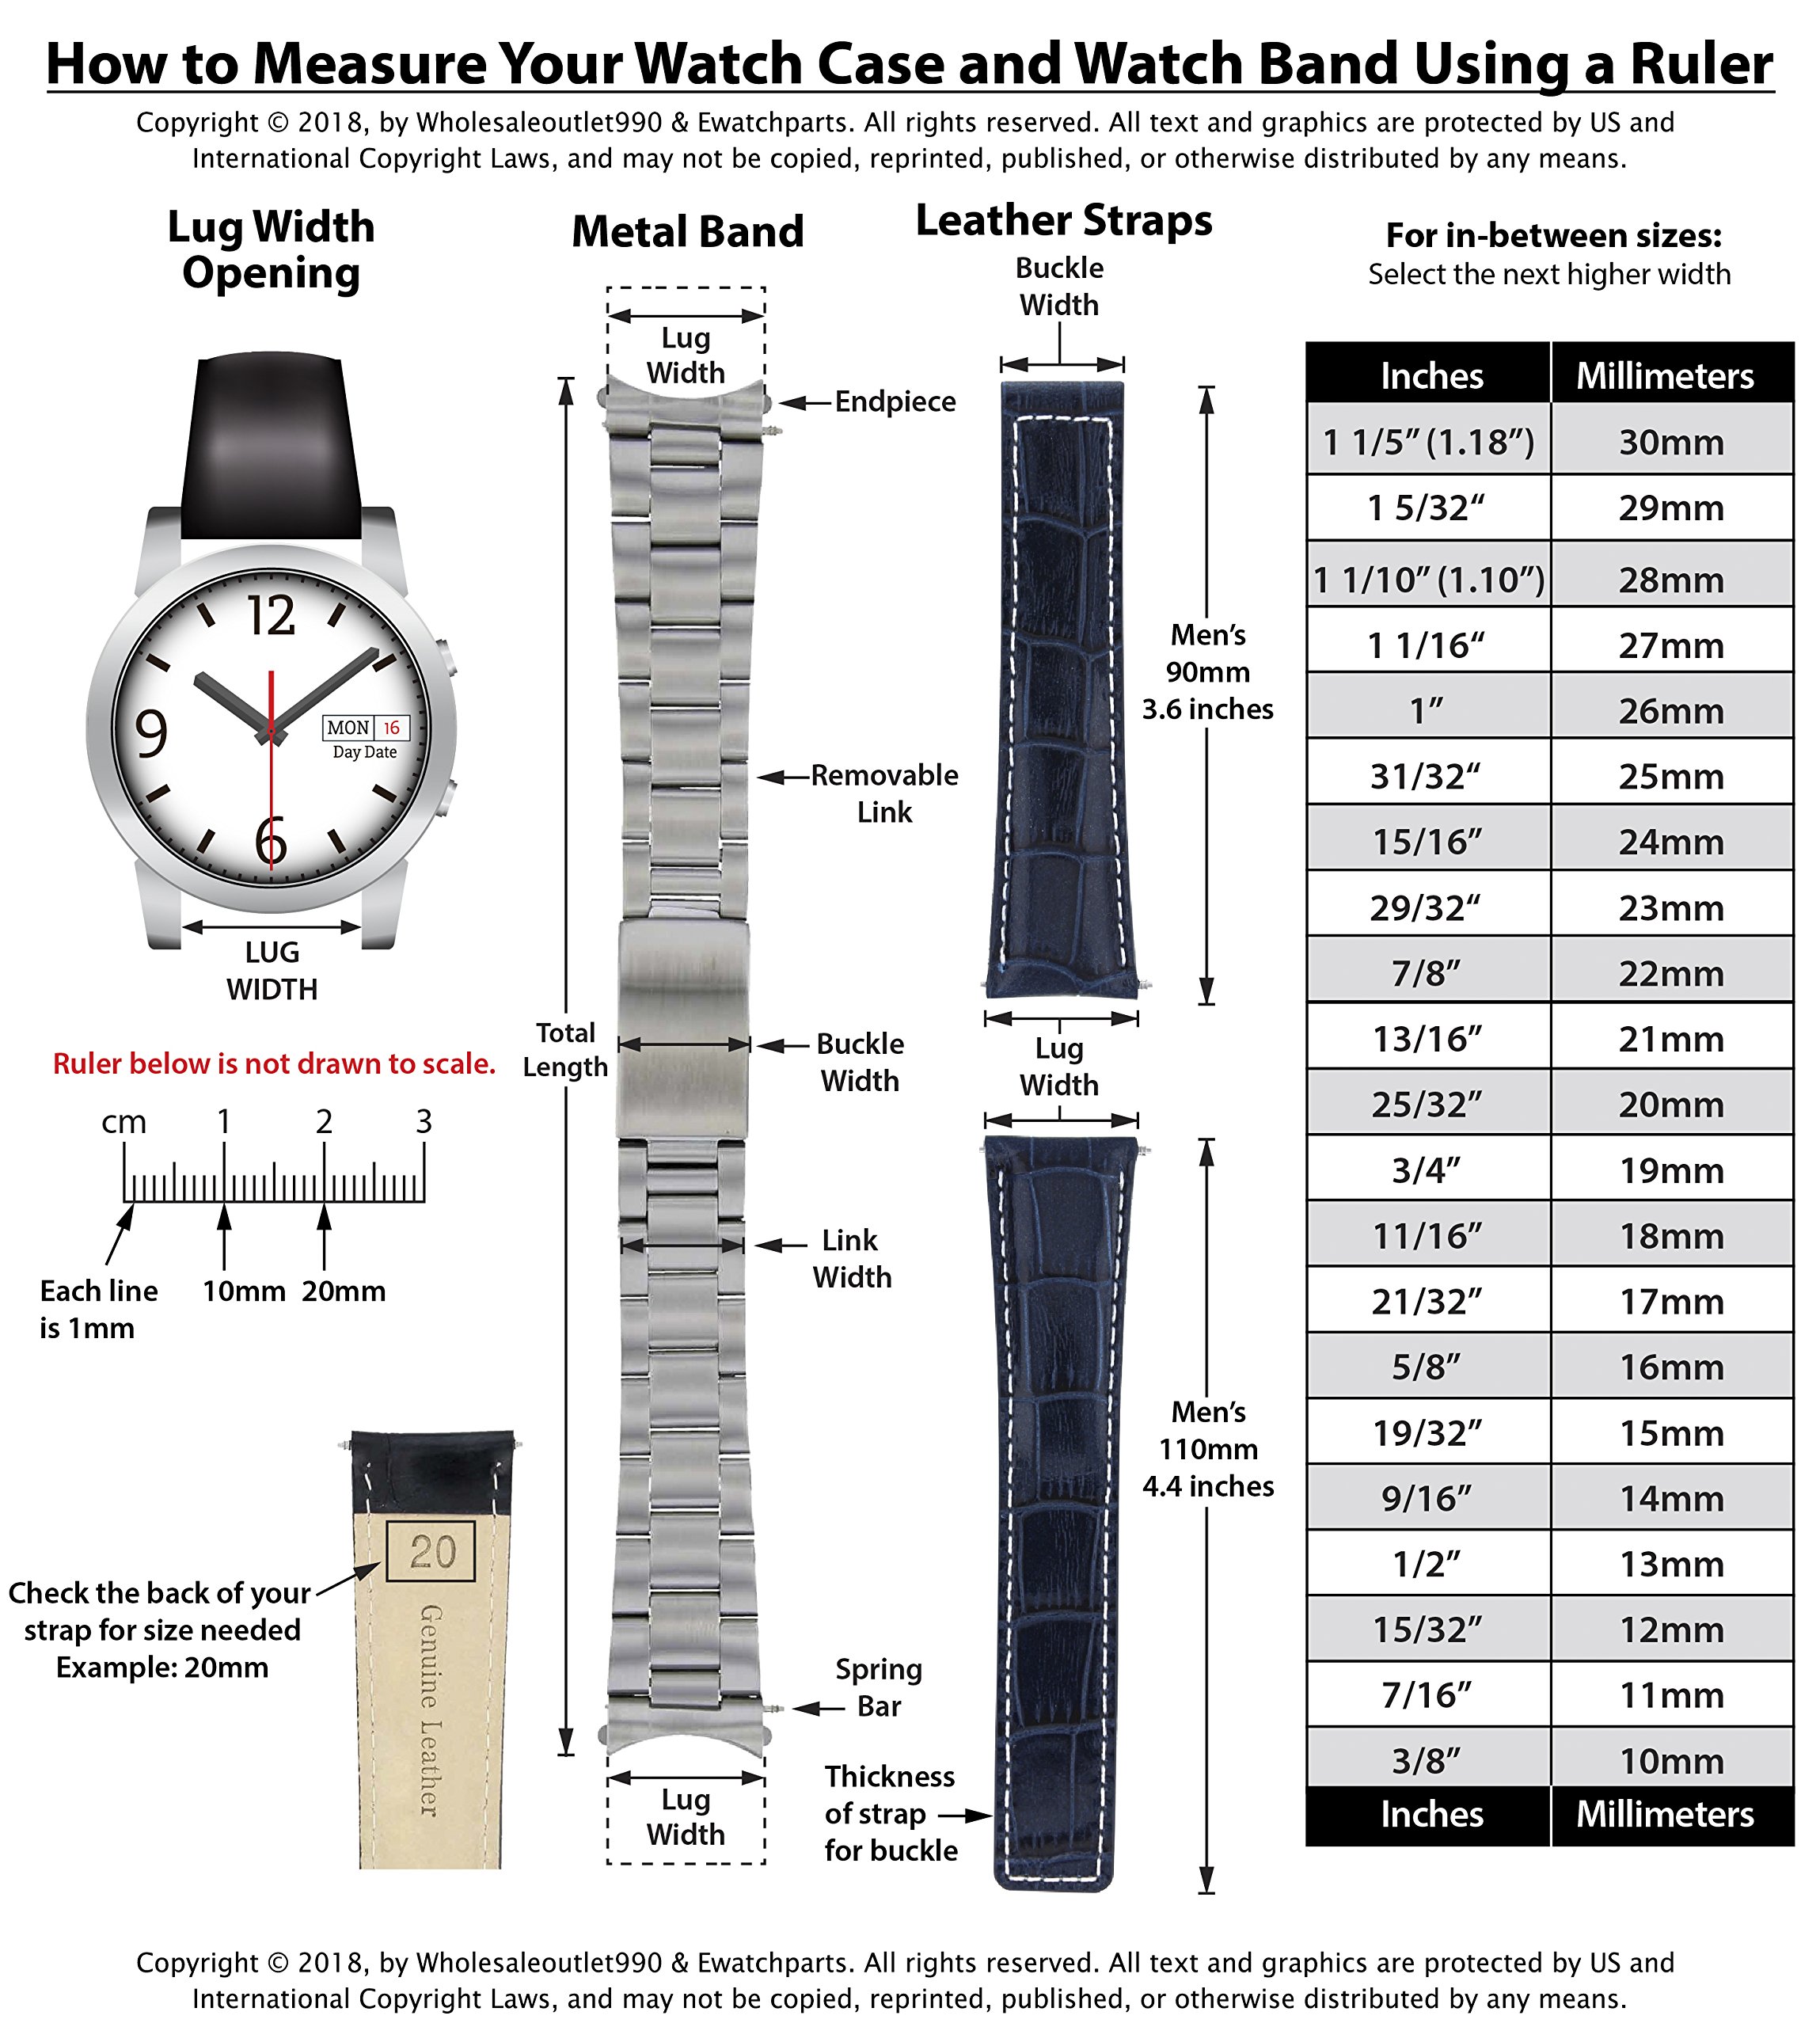 Ewatchparts LINK PIN & TUBES COMPATIBLE WITH OMEGA SEAMASTER WATCH BAND BRACELET 1503-825 2531 2221 2541